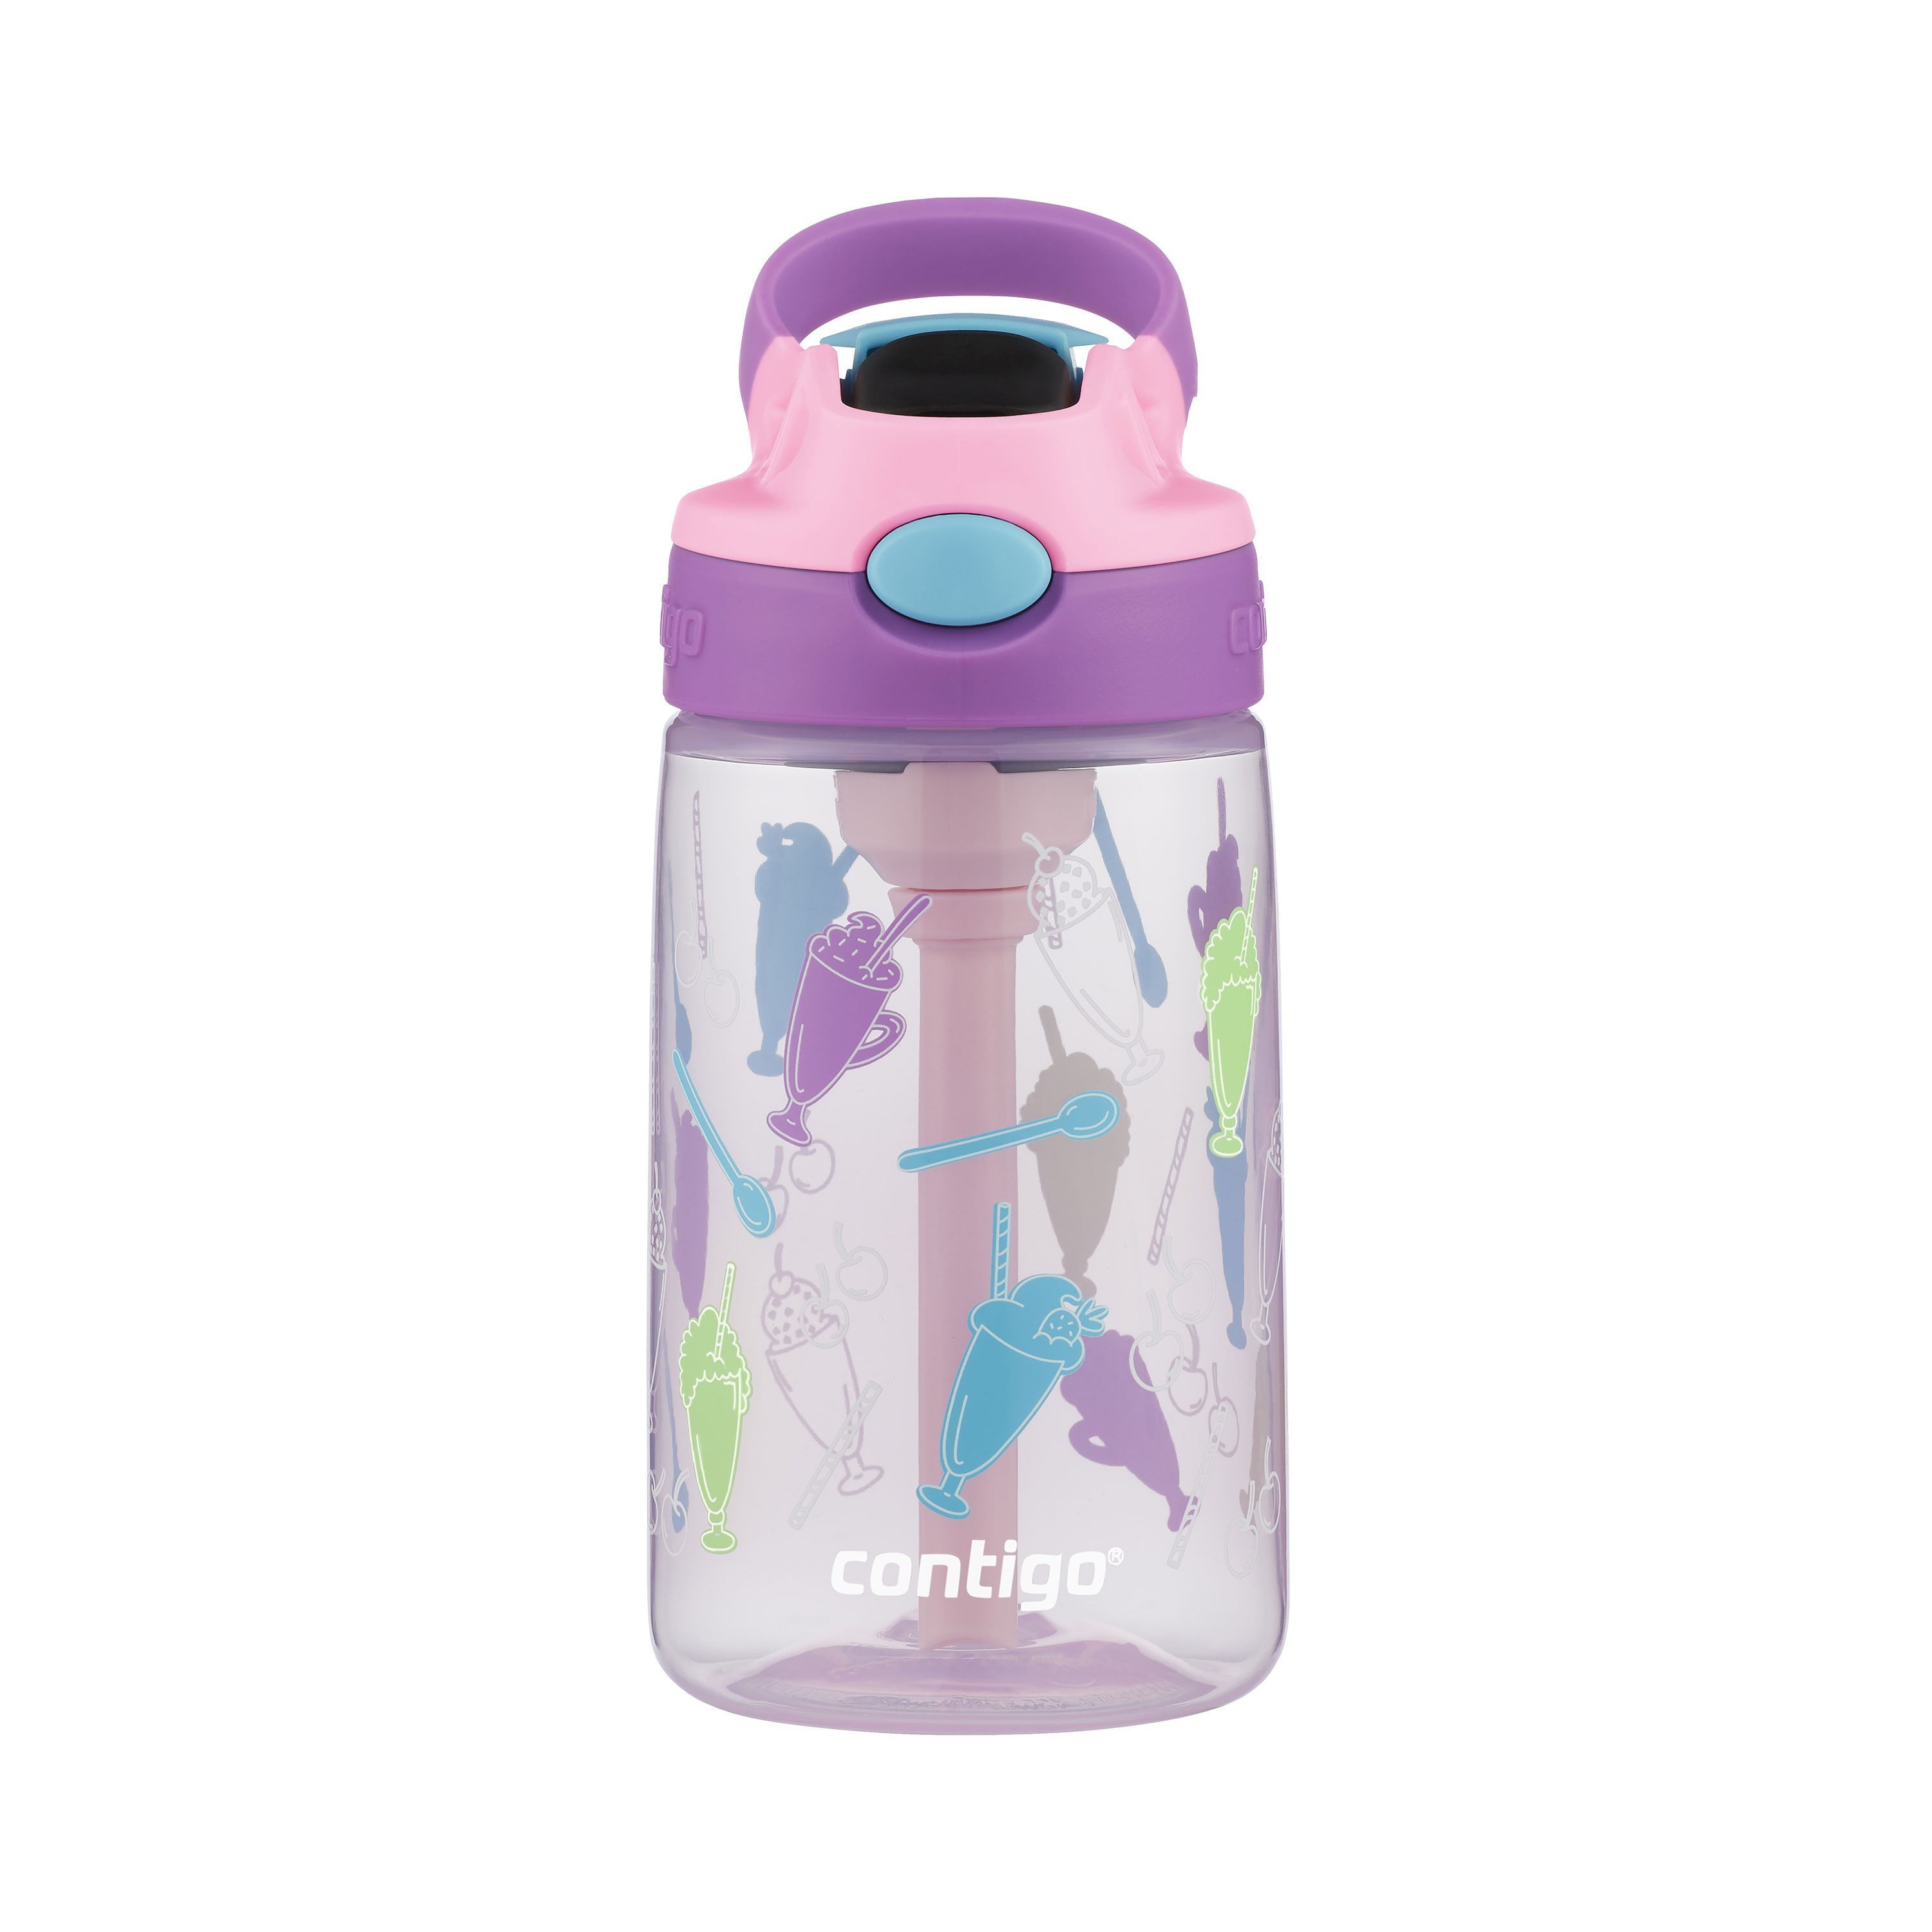 Small modern kids water bottle with pink plastic straw simple